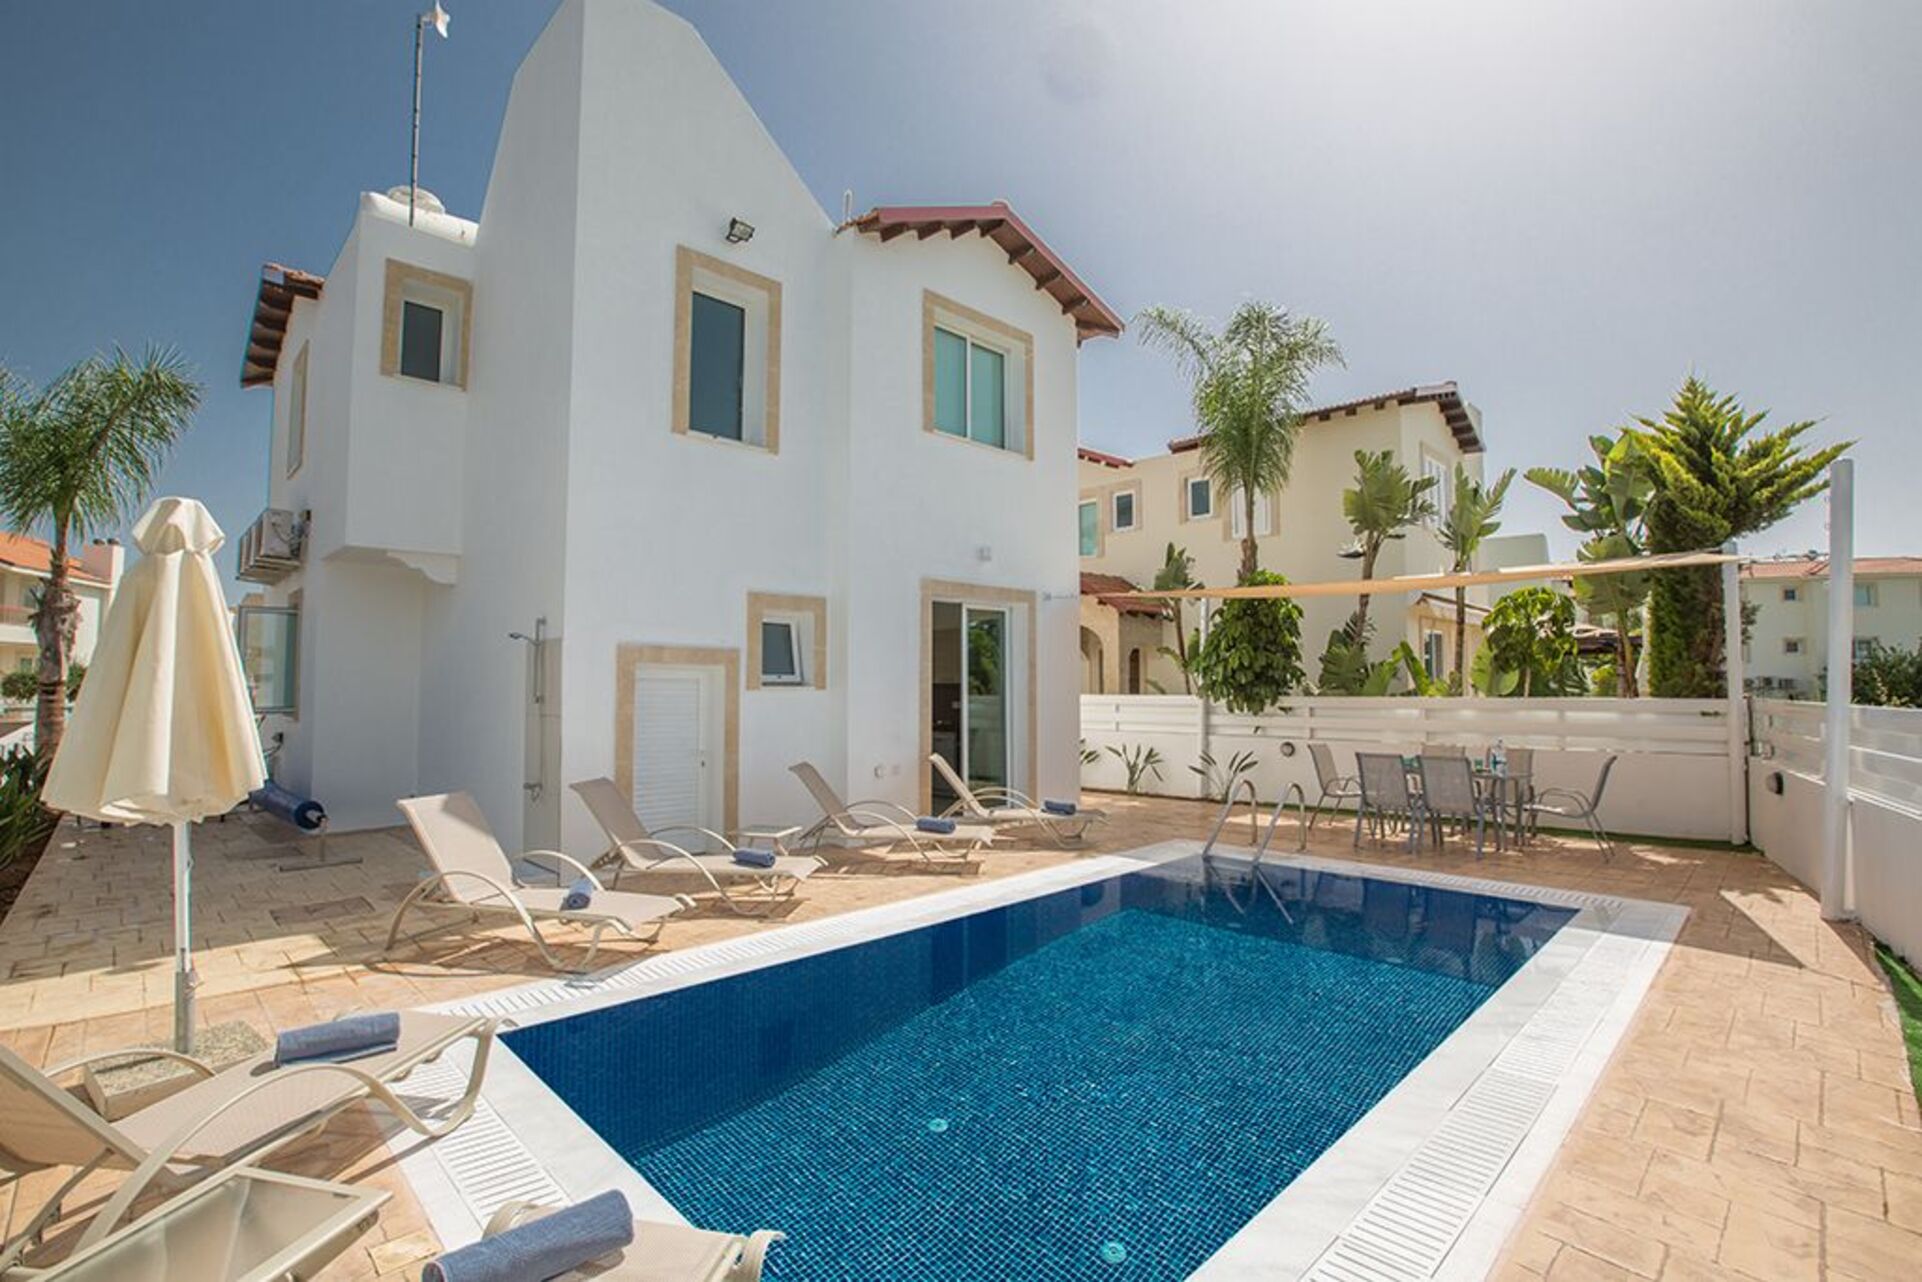 Property Image 1 - The Ultimate Property Manager Holiday Villa in Protaras with Private Pool and Close to the Beach, Paralimn